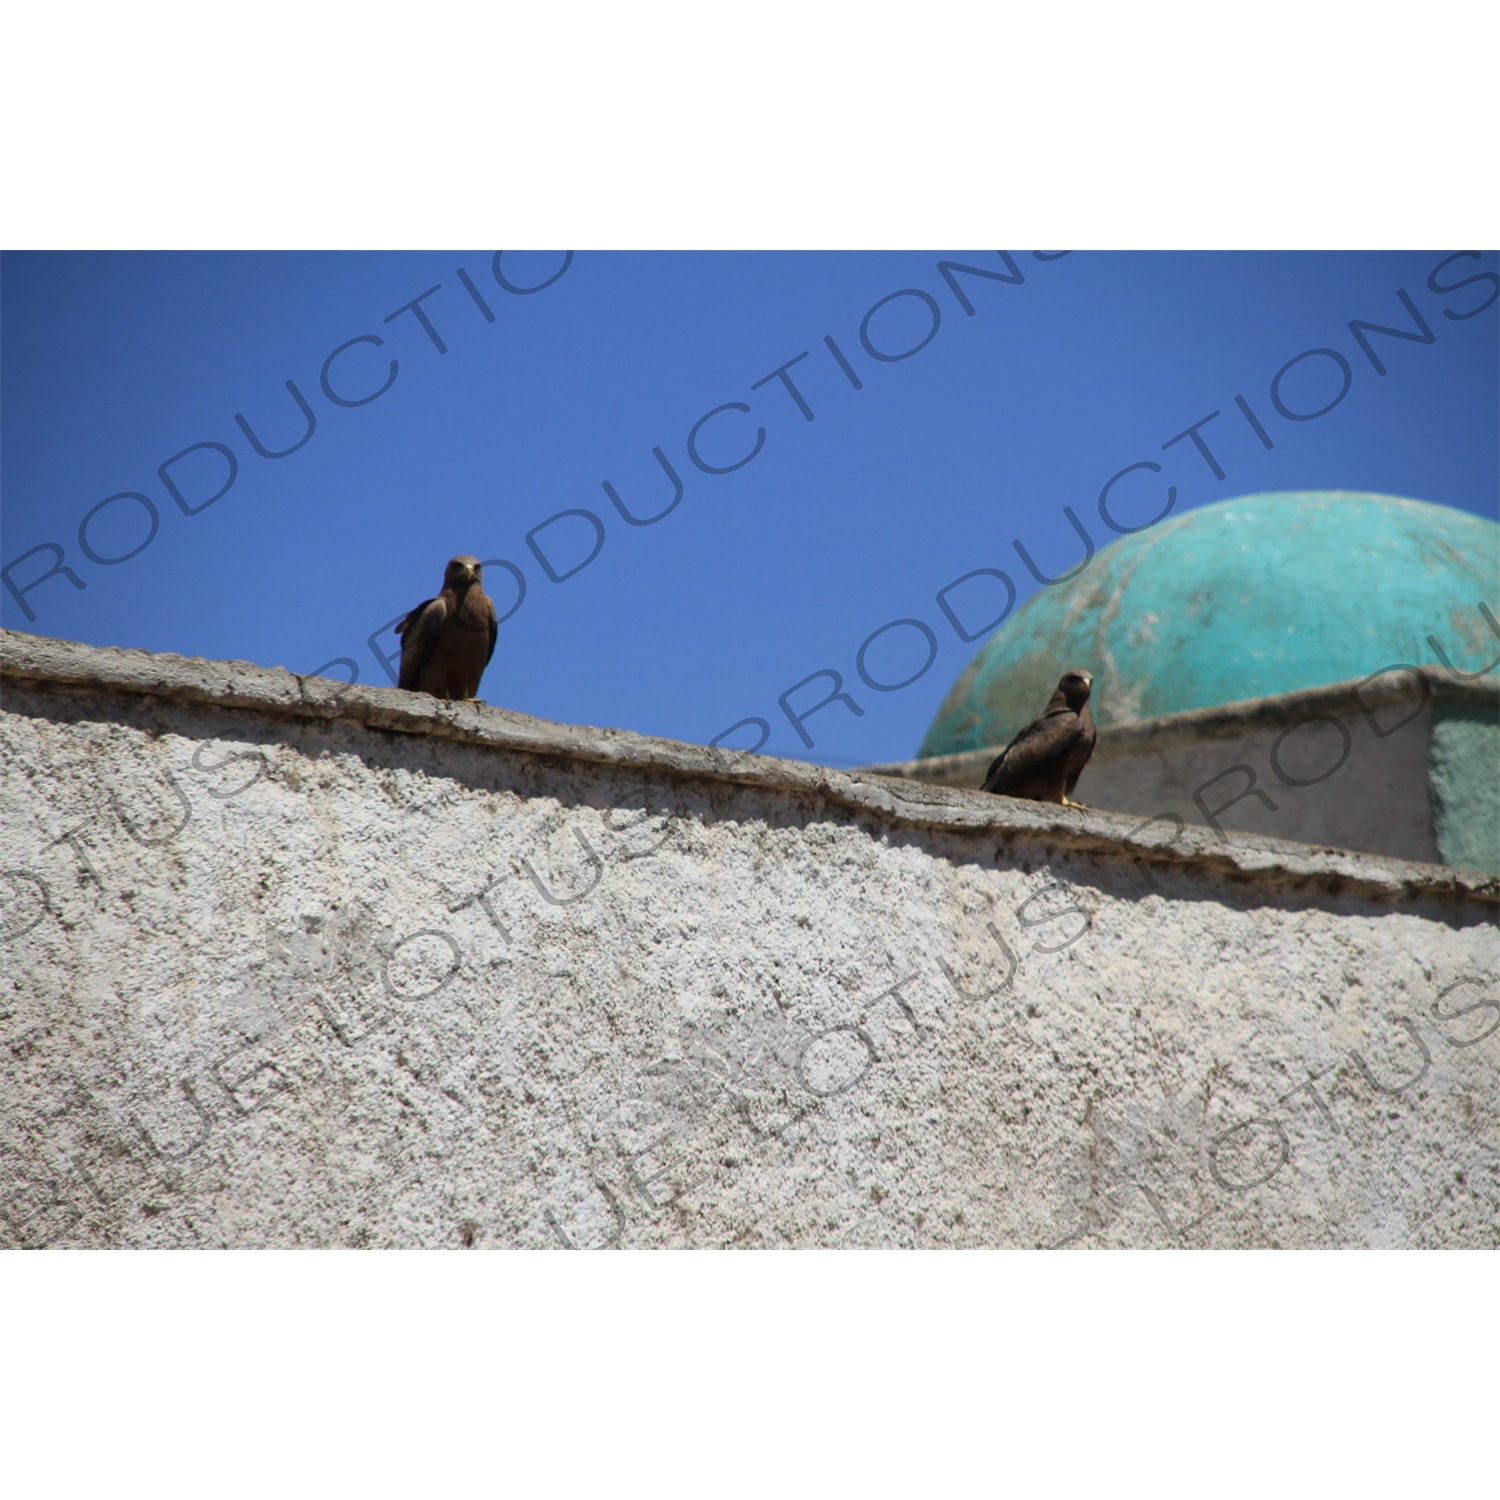 Eagles on a Building in the Old City of Harar